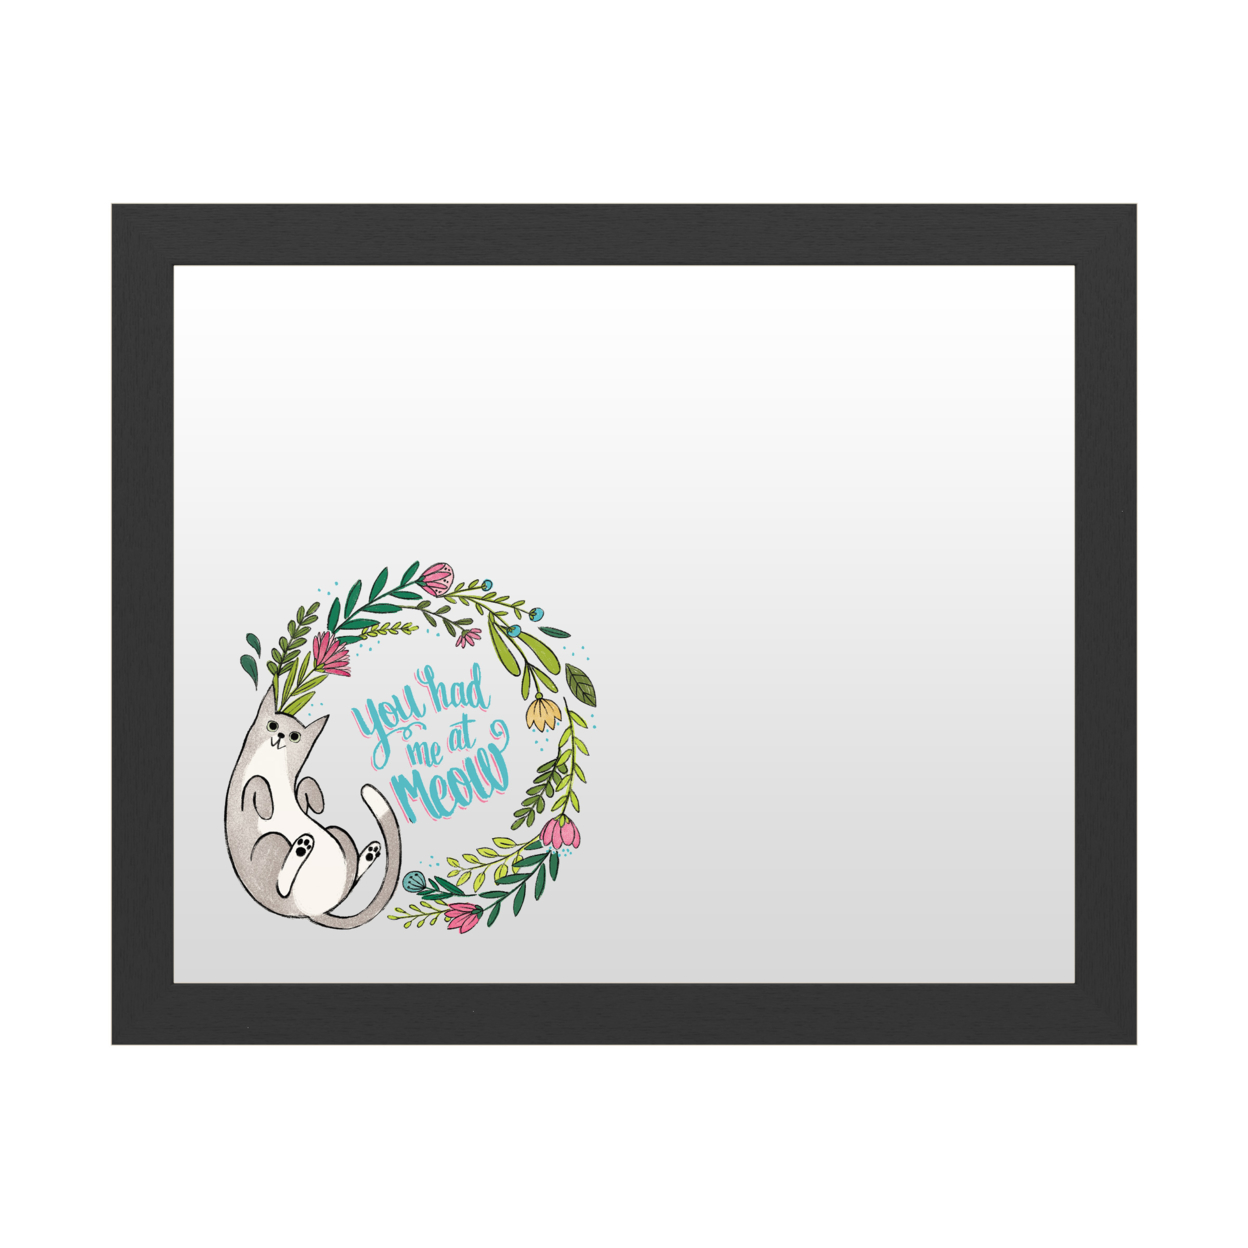 Dry Erase 16 X 20 Marker Board With Printed Artwork - Janelle Penner Purrfect Garden Vii White Board - Ready To Hang